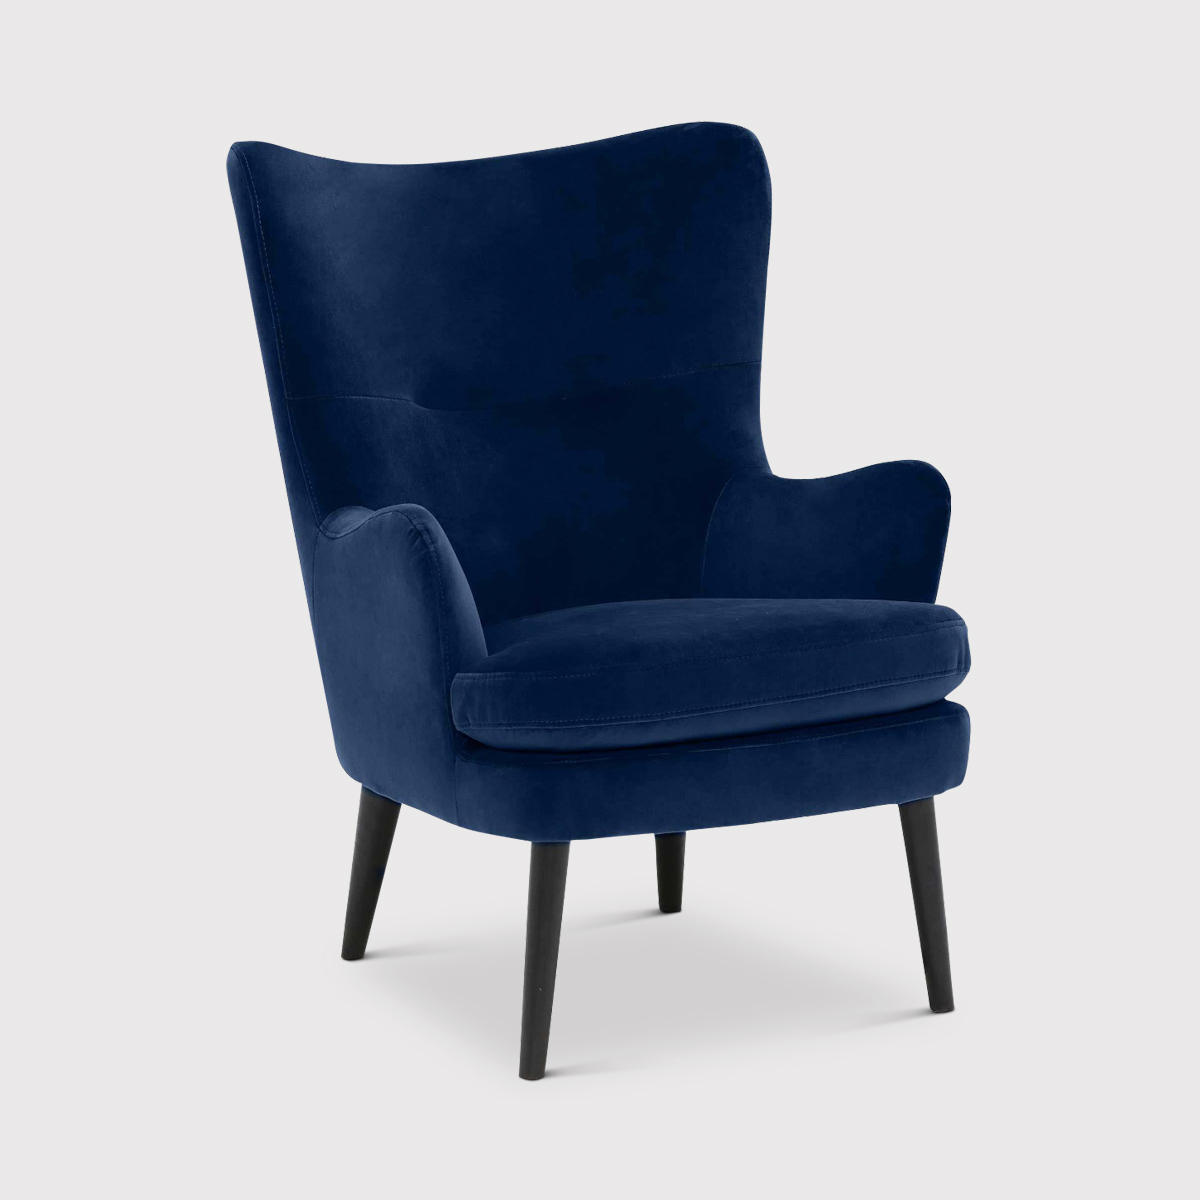 Marcy Armchair, Navy Fabric | Barker & Stonehouse